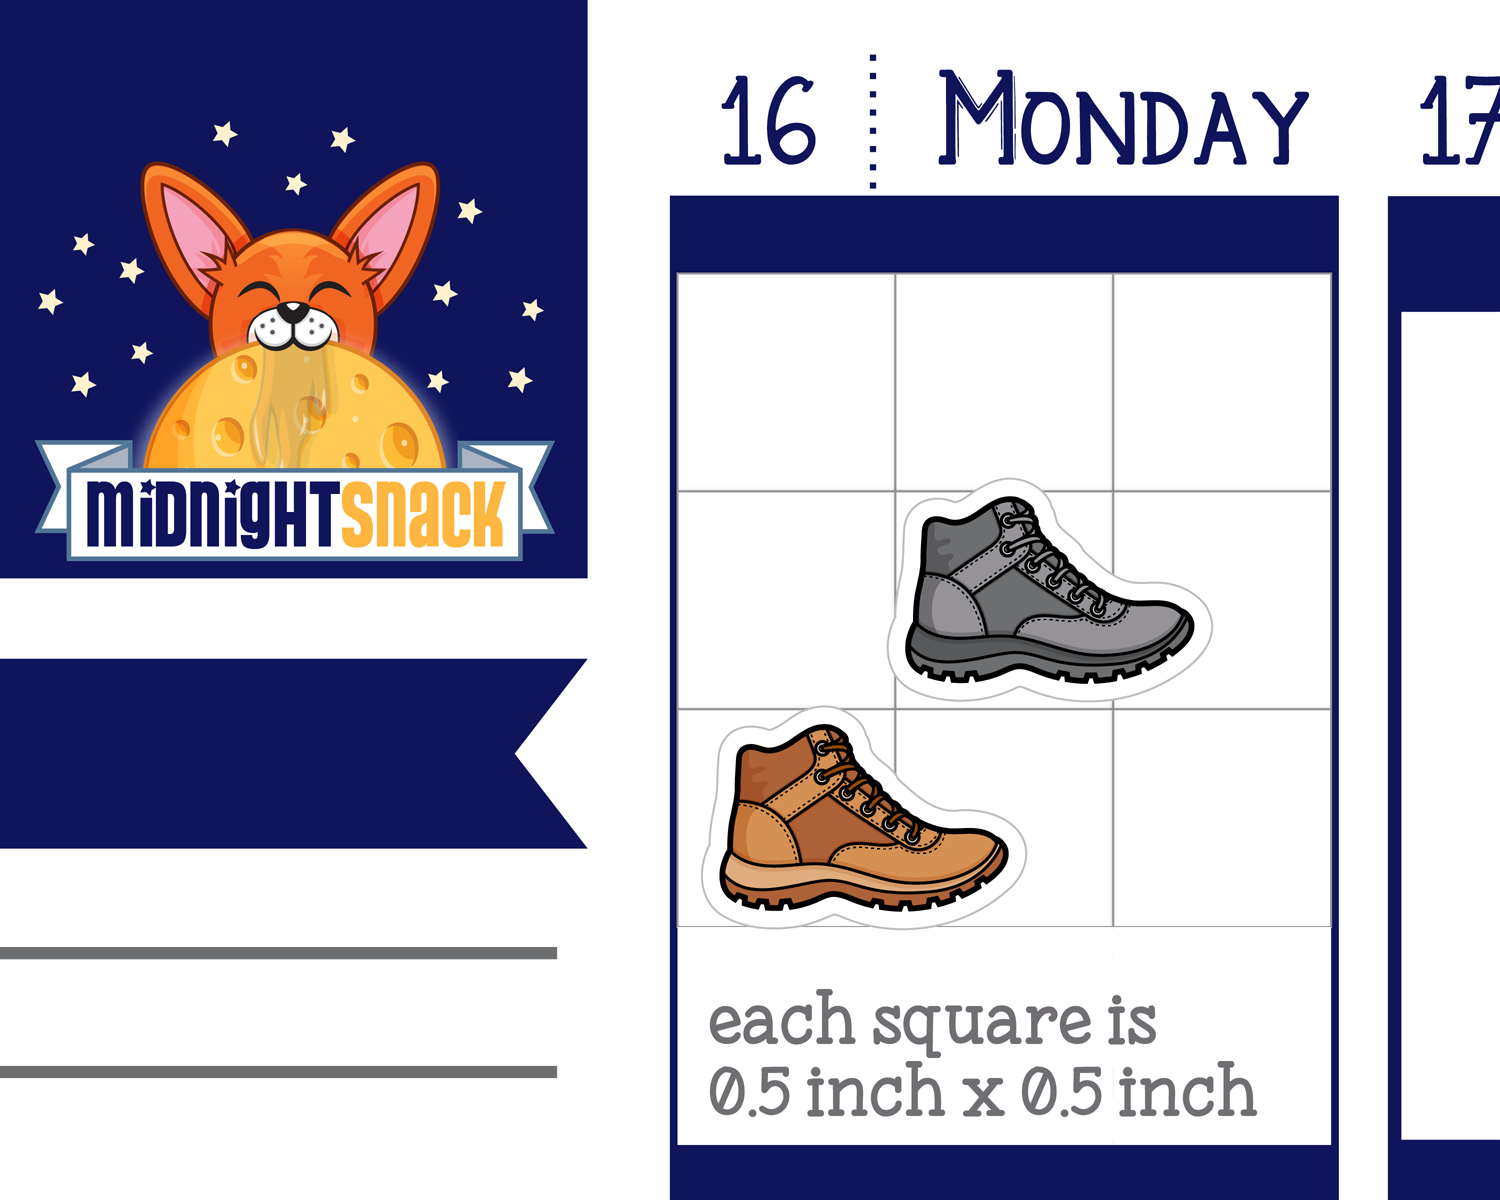 Hiking Boot Icon: Fitness and Exercise Planner Stickers